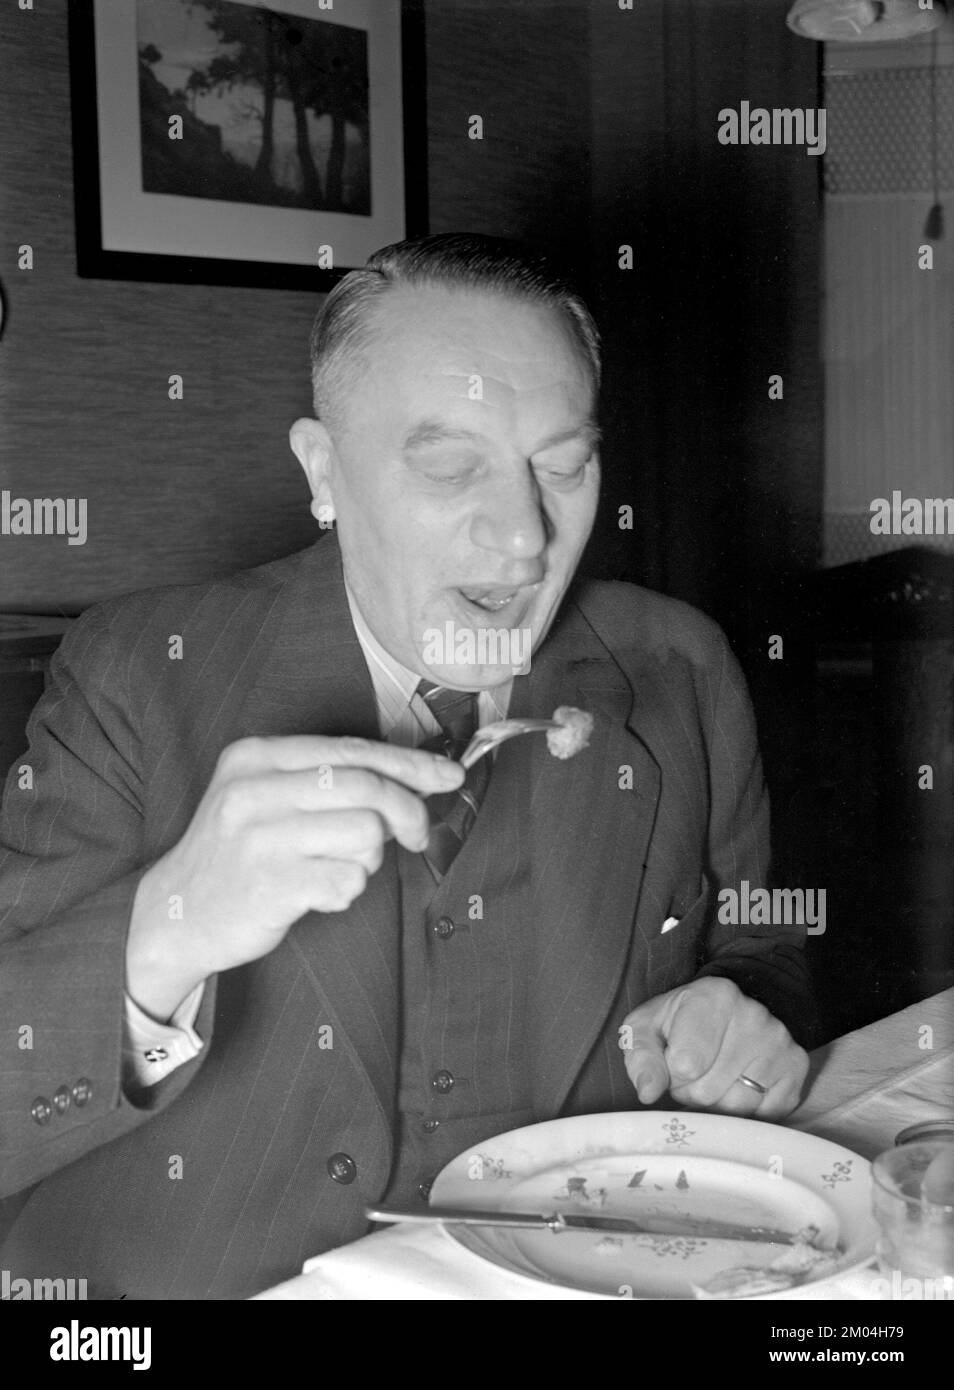 At christmas in the 1940s. A man is having christmas dinner and has a meatball on his fork ready to eat.  Sweden december 1940 Kristoffersson 42-10 Stock Photo